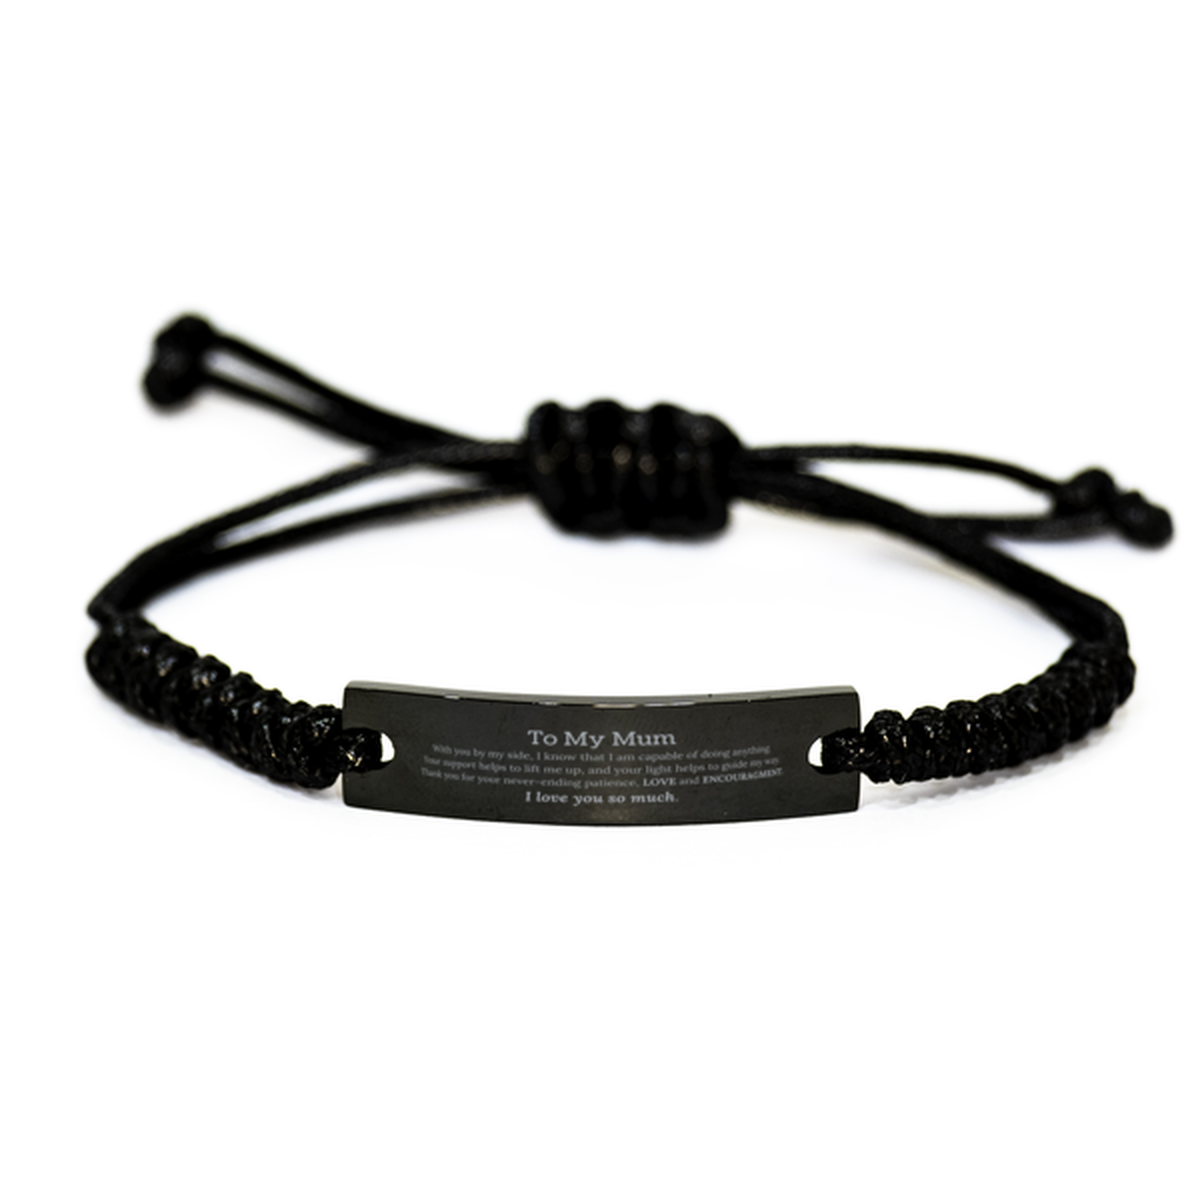 Appreciation Mum Black Rope Bracelet Gifts, To My Mum Birthday Christmas Wedding Keepsake Gifts for Mum With you by my side, I know that I am capable of doing anything. I love you so much